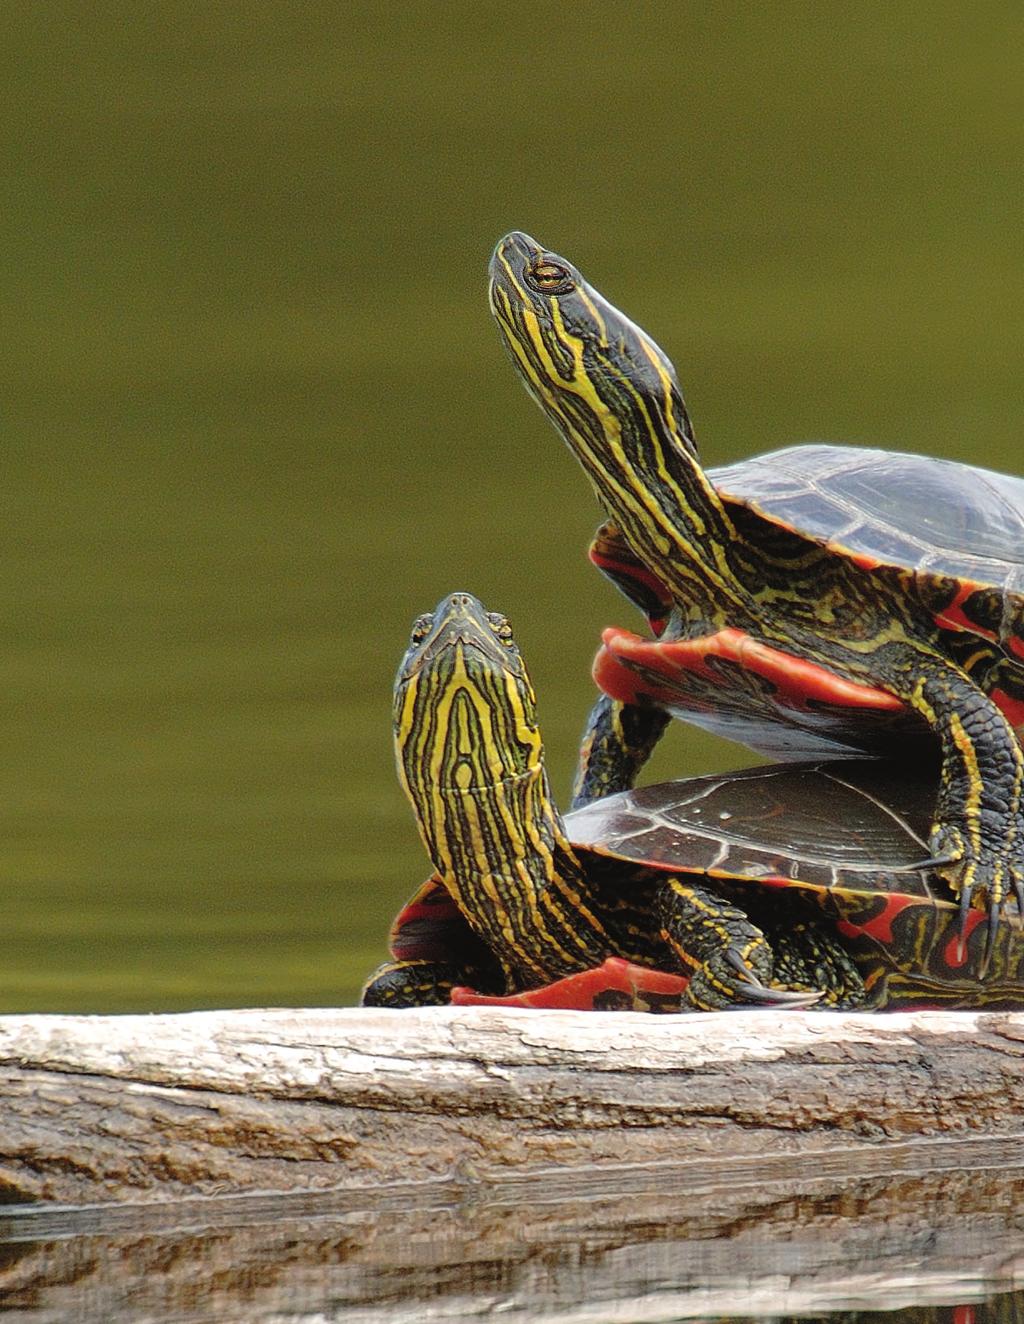 5 Alberta Conservation Association - Reptiles of Alberta western painted turtle The western painted turtle so called because of its brightly coloured shell, head and limbs naturally occurs in a